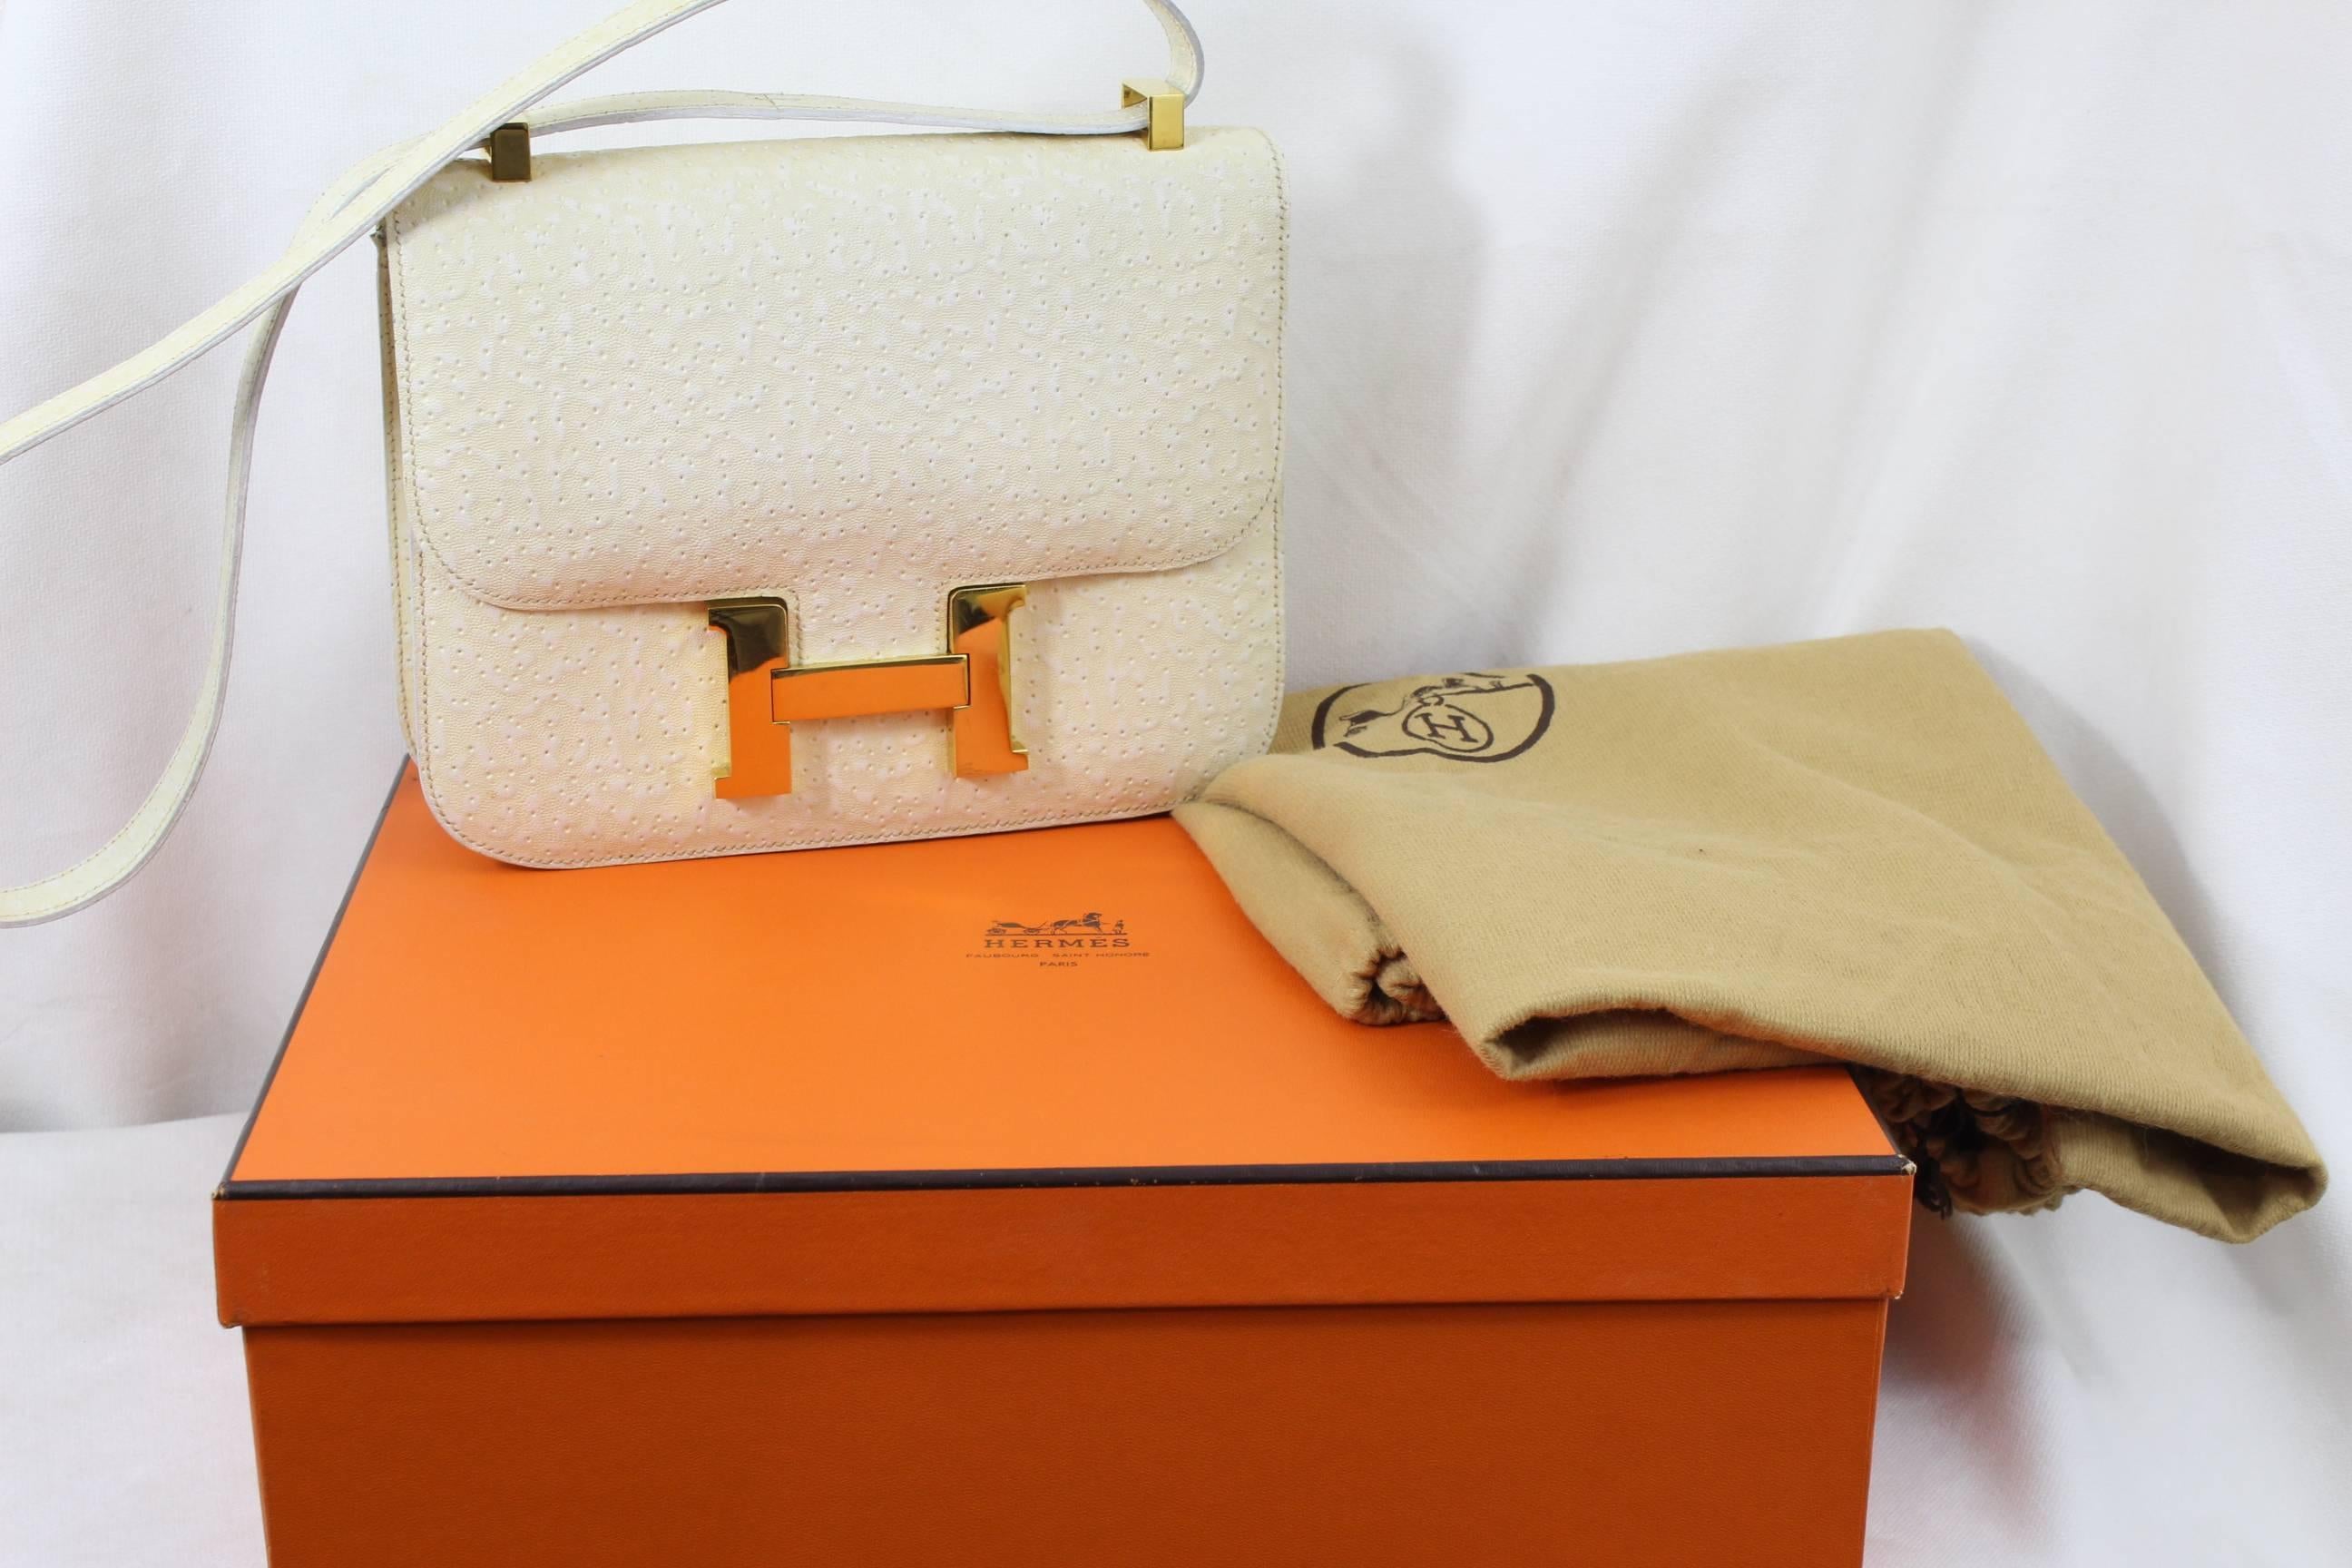 1973 Hermes Constance Bag in Beluga Leather    For Sale 5